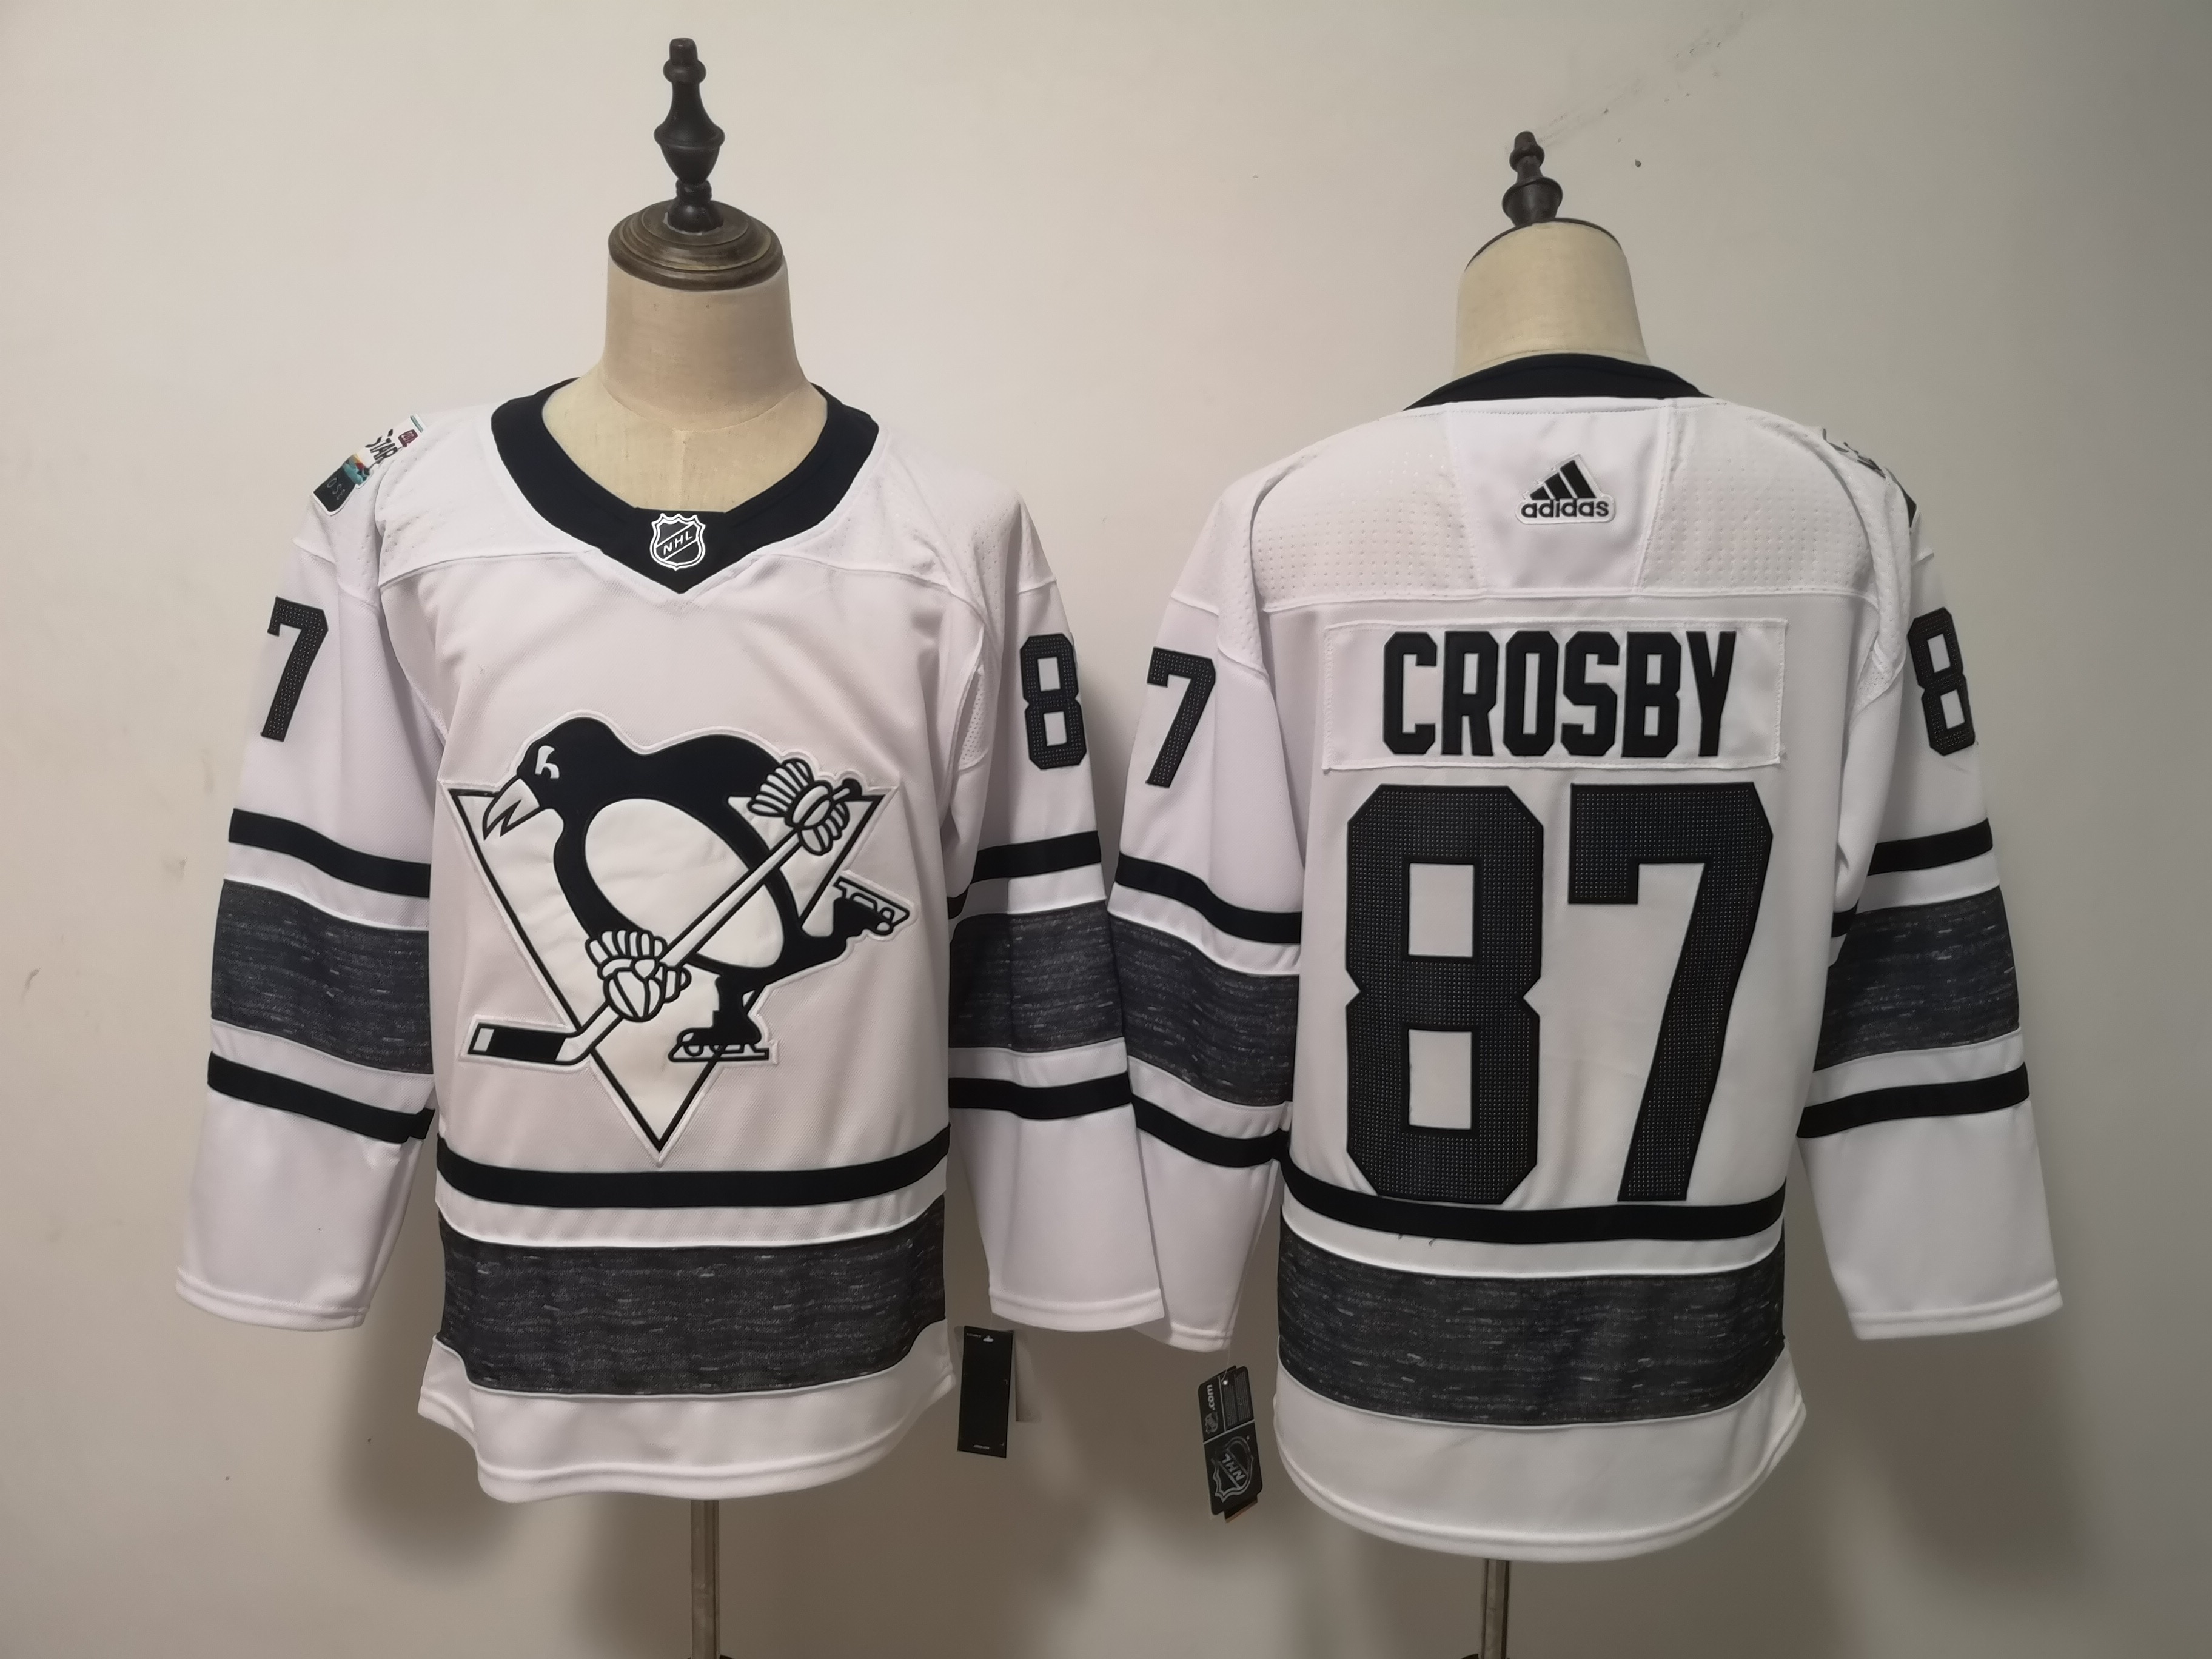 Pittsburgh Penguins 2019 CROSBY #87 White All Star NHL Jersey